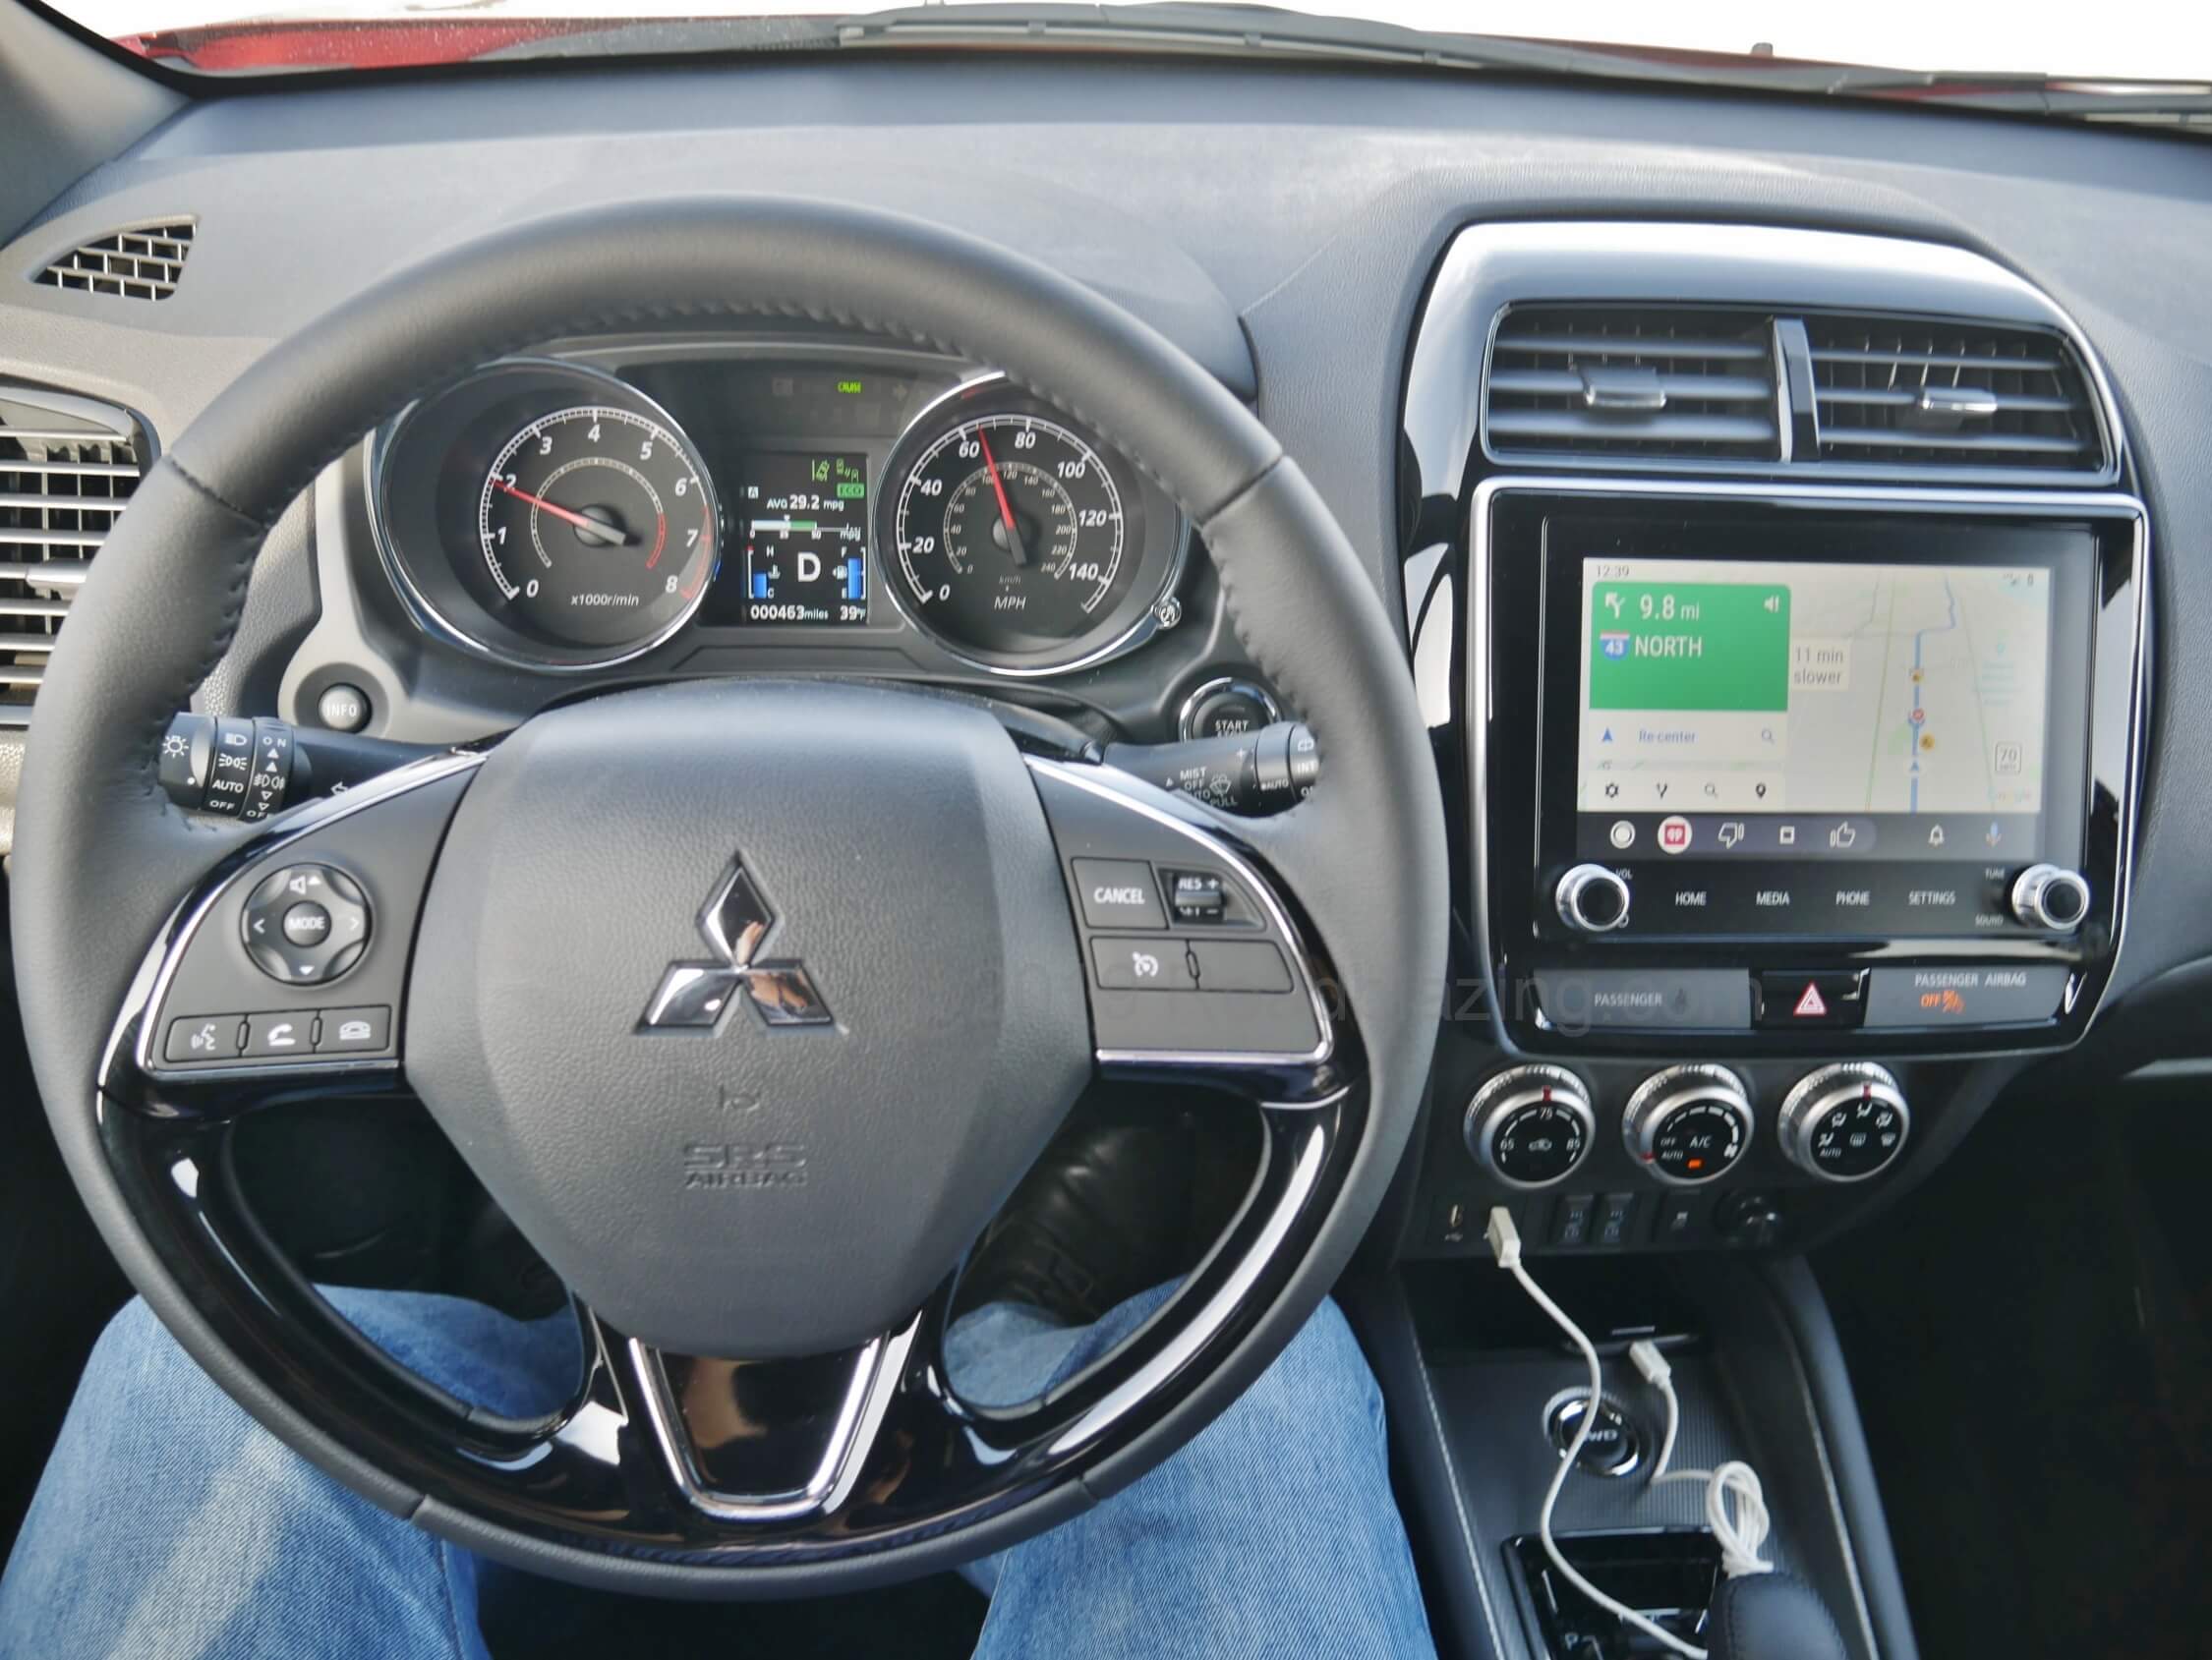 2020 Mitsubishi Outlander Sport 2.4 GT AWC: Navigating with Android Auto Google Maps. Apple CarPlay can also be projected.